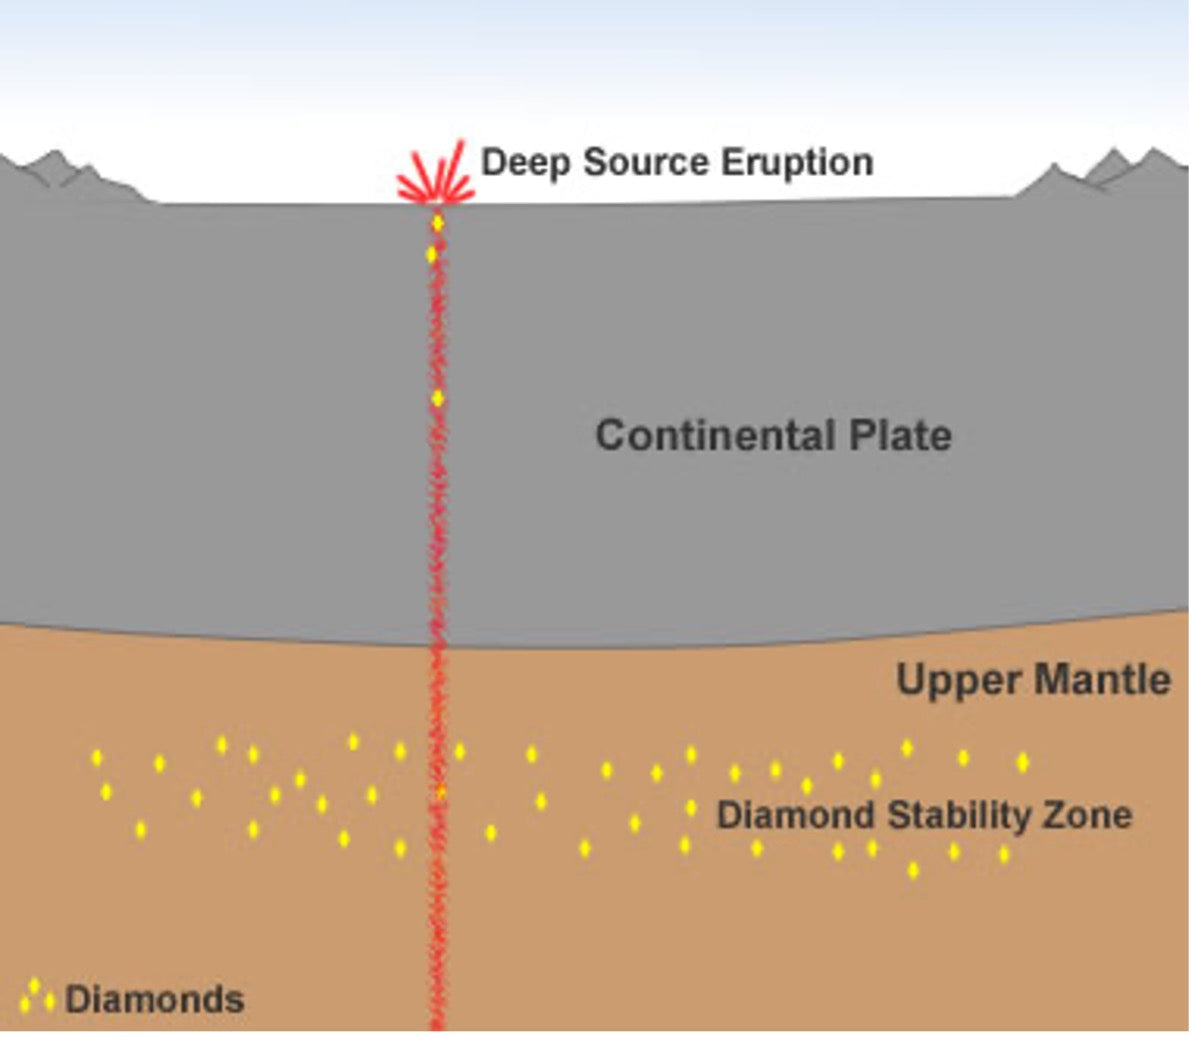 Diagram depicting the formation of a diamond in the Earth's mantle